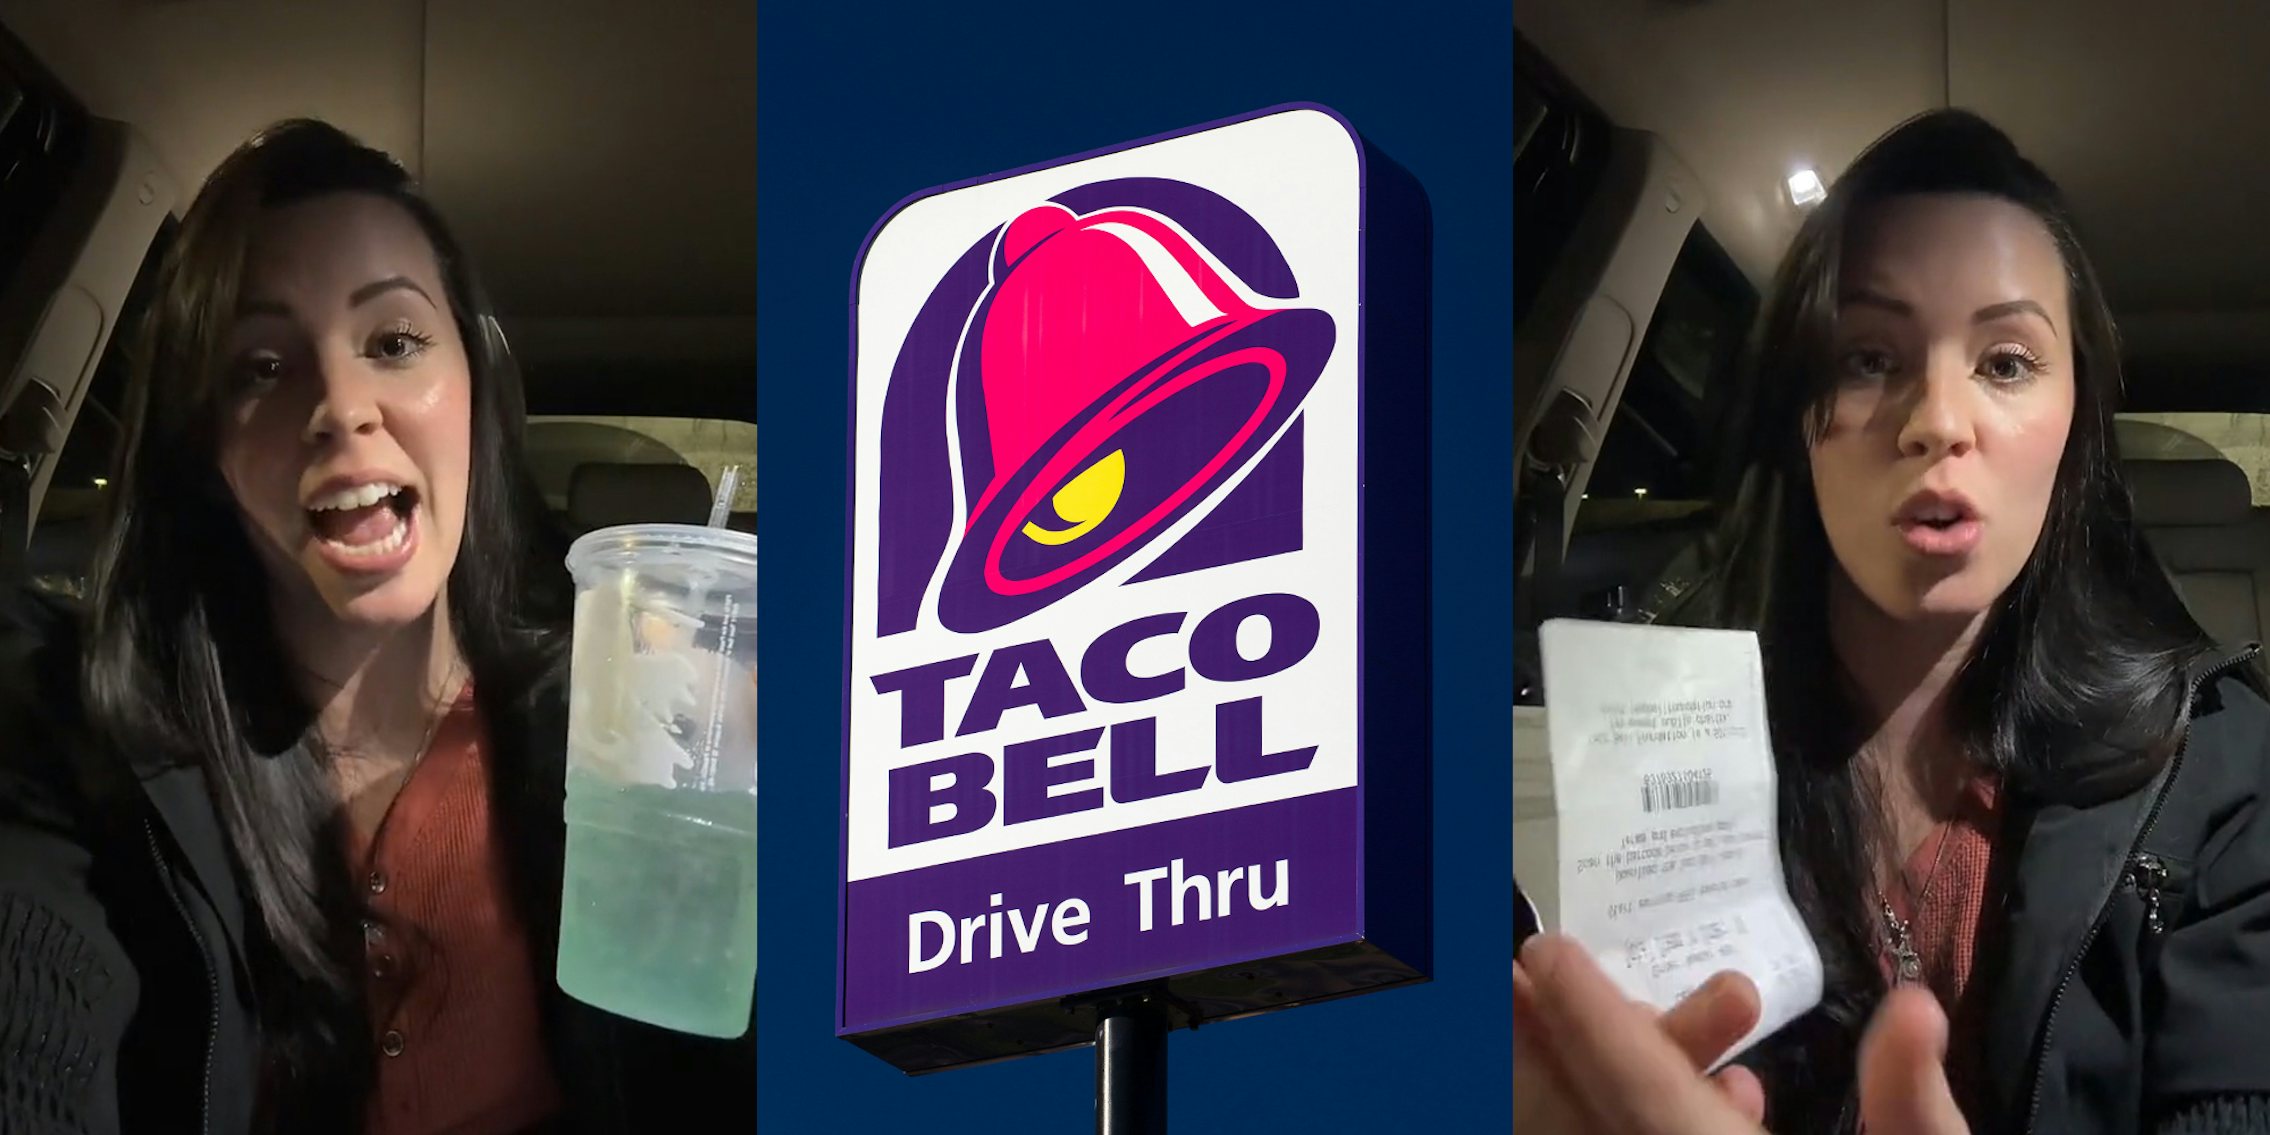 Taco Bell customer speaking in car (l) Taco Bell drive thru sign in front of blue sky (c) Taco Bell customer speaking in car holding receipt (r)